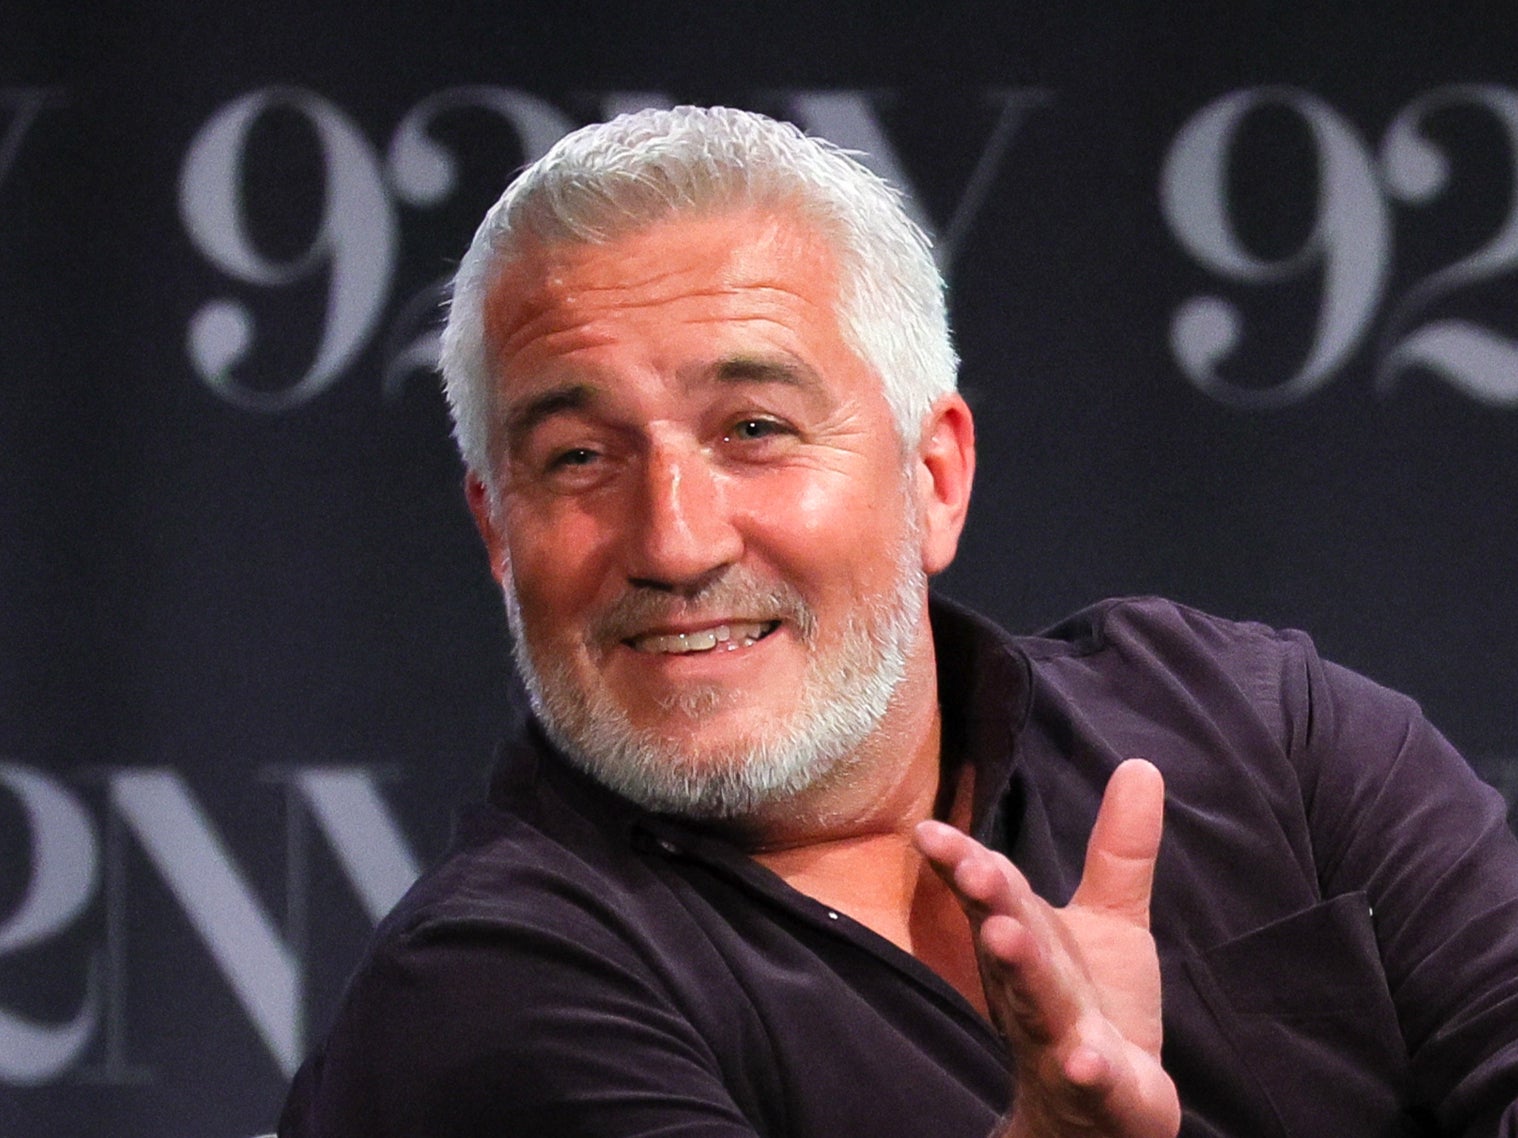 Paul Hollywood is one of the stars of Channel 4’s ‘Bake Off'